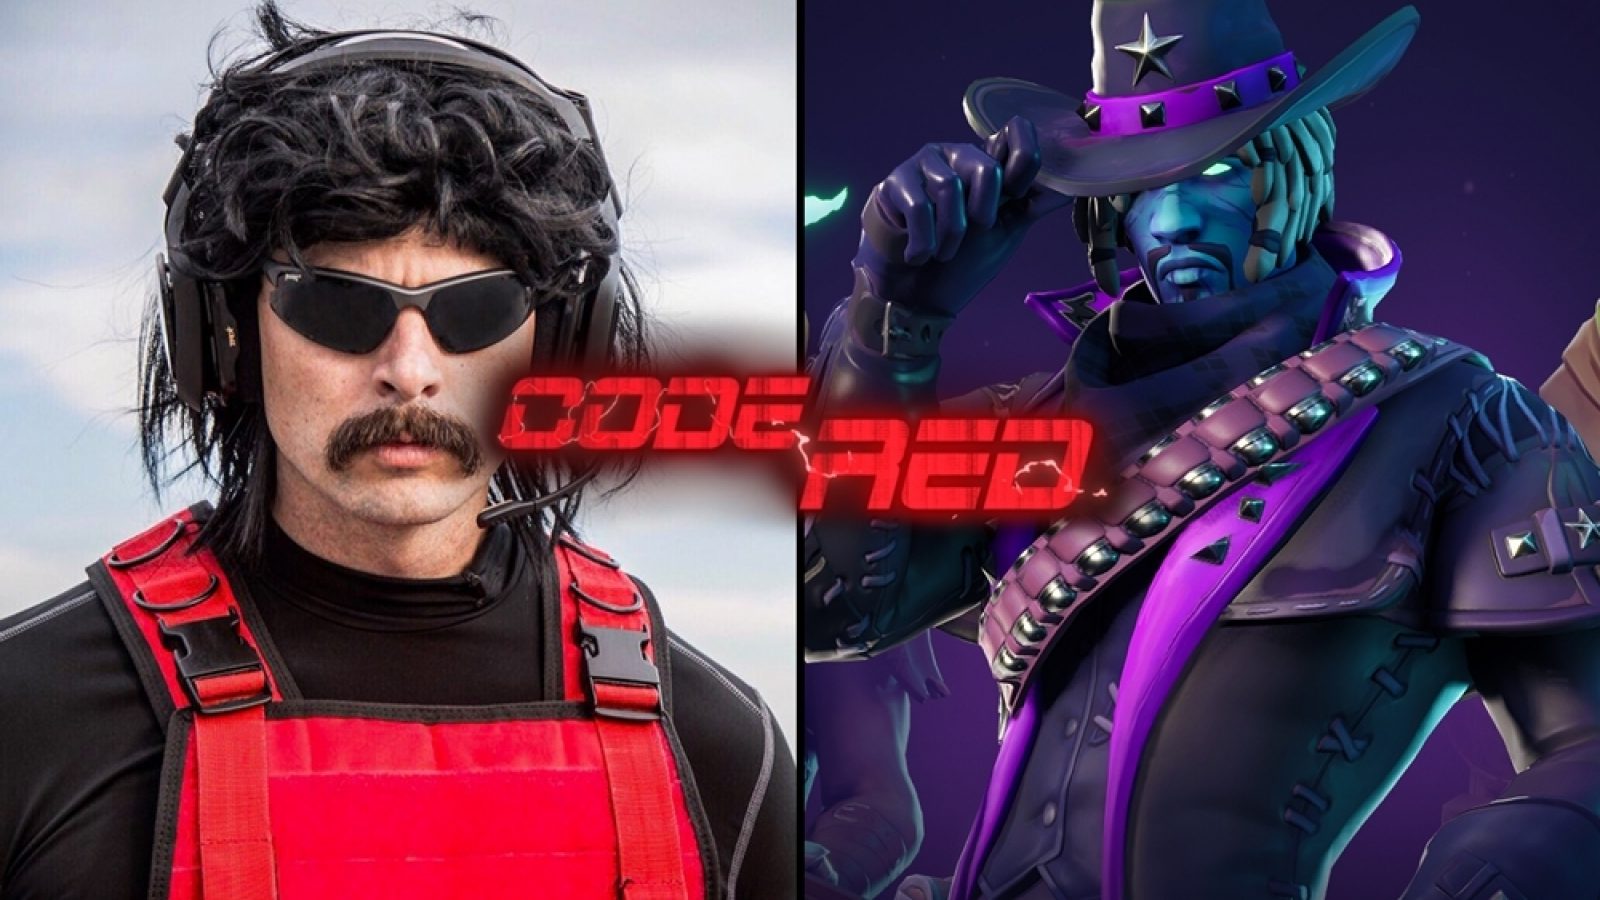 Variant Fortolke våben Dr DisRespect hilariously celebrates getting his Code Red Fortnite  tournament on the front page of Twitch - Dexerto